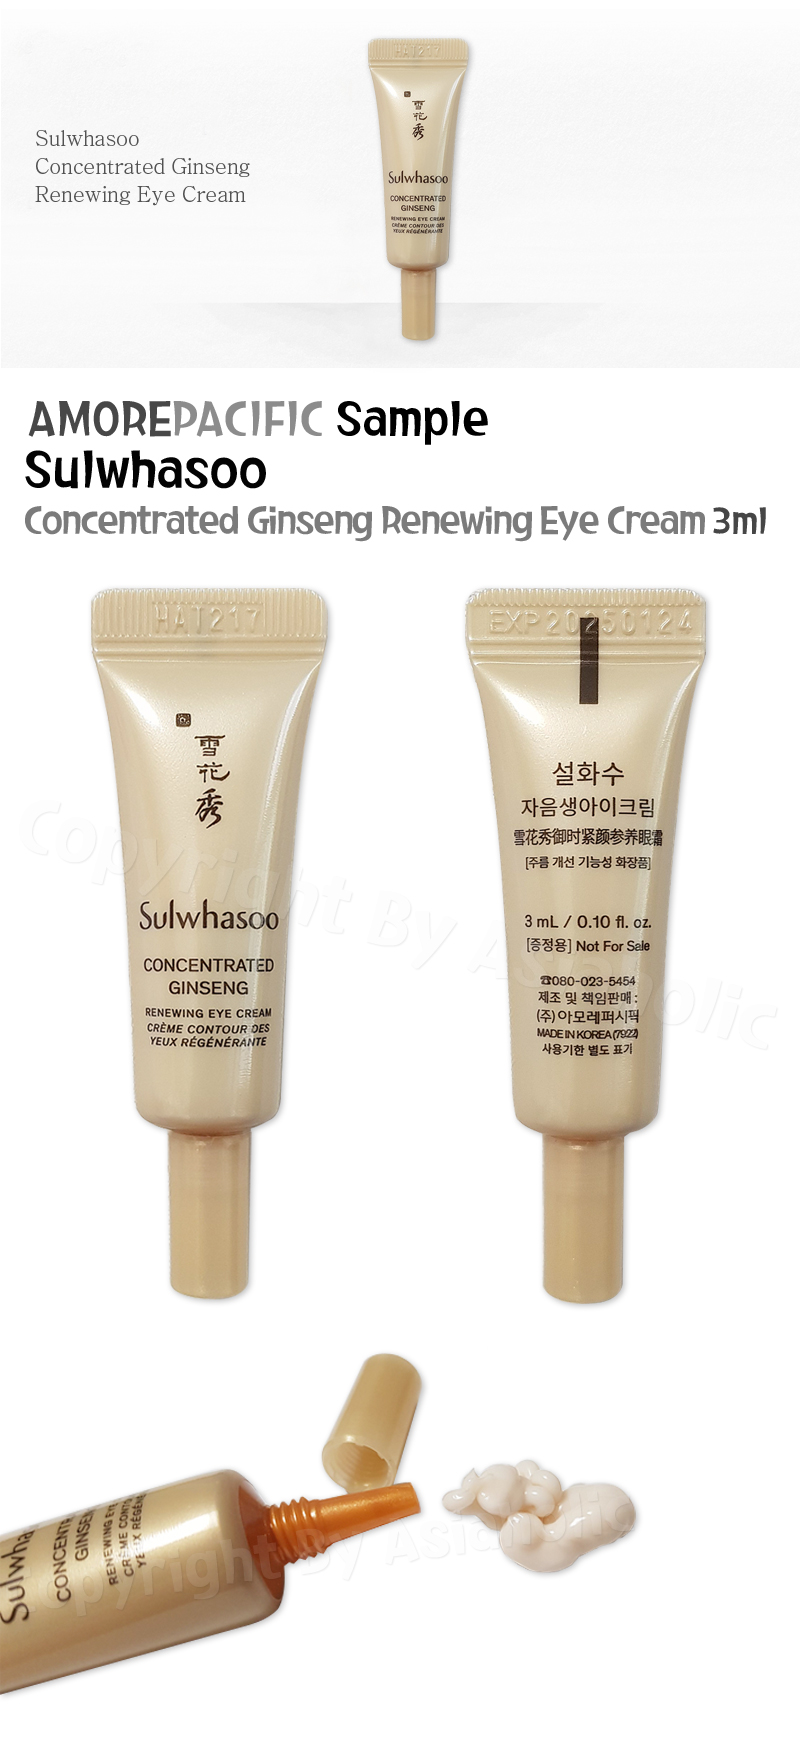 Sulwhasoo Concentrated Ginseng Renewing Eye Cream 3ml x 1pcs (3ml) Newest Version